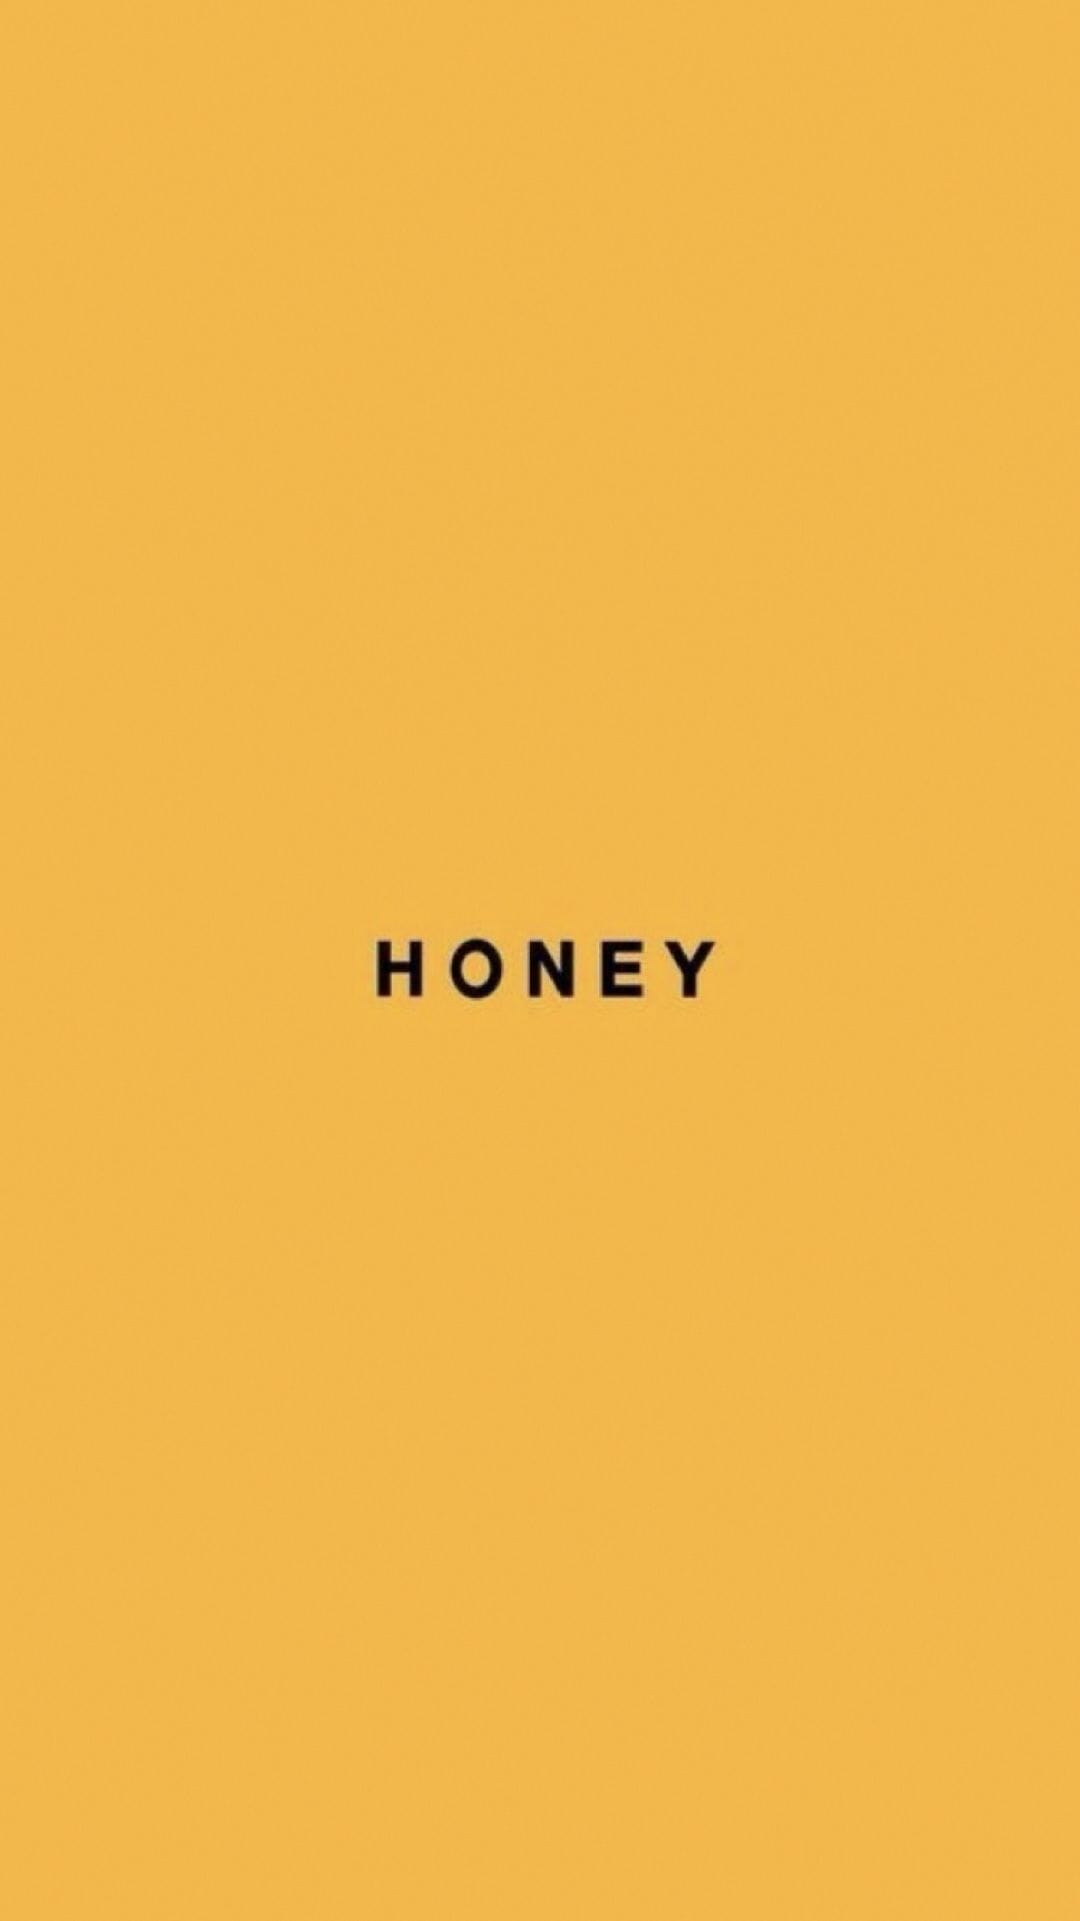 A yellow background with the word honey on it - Honey